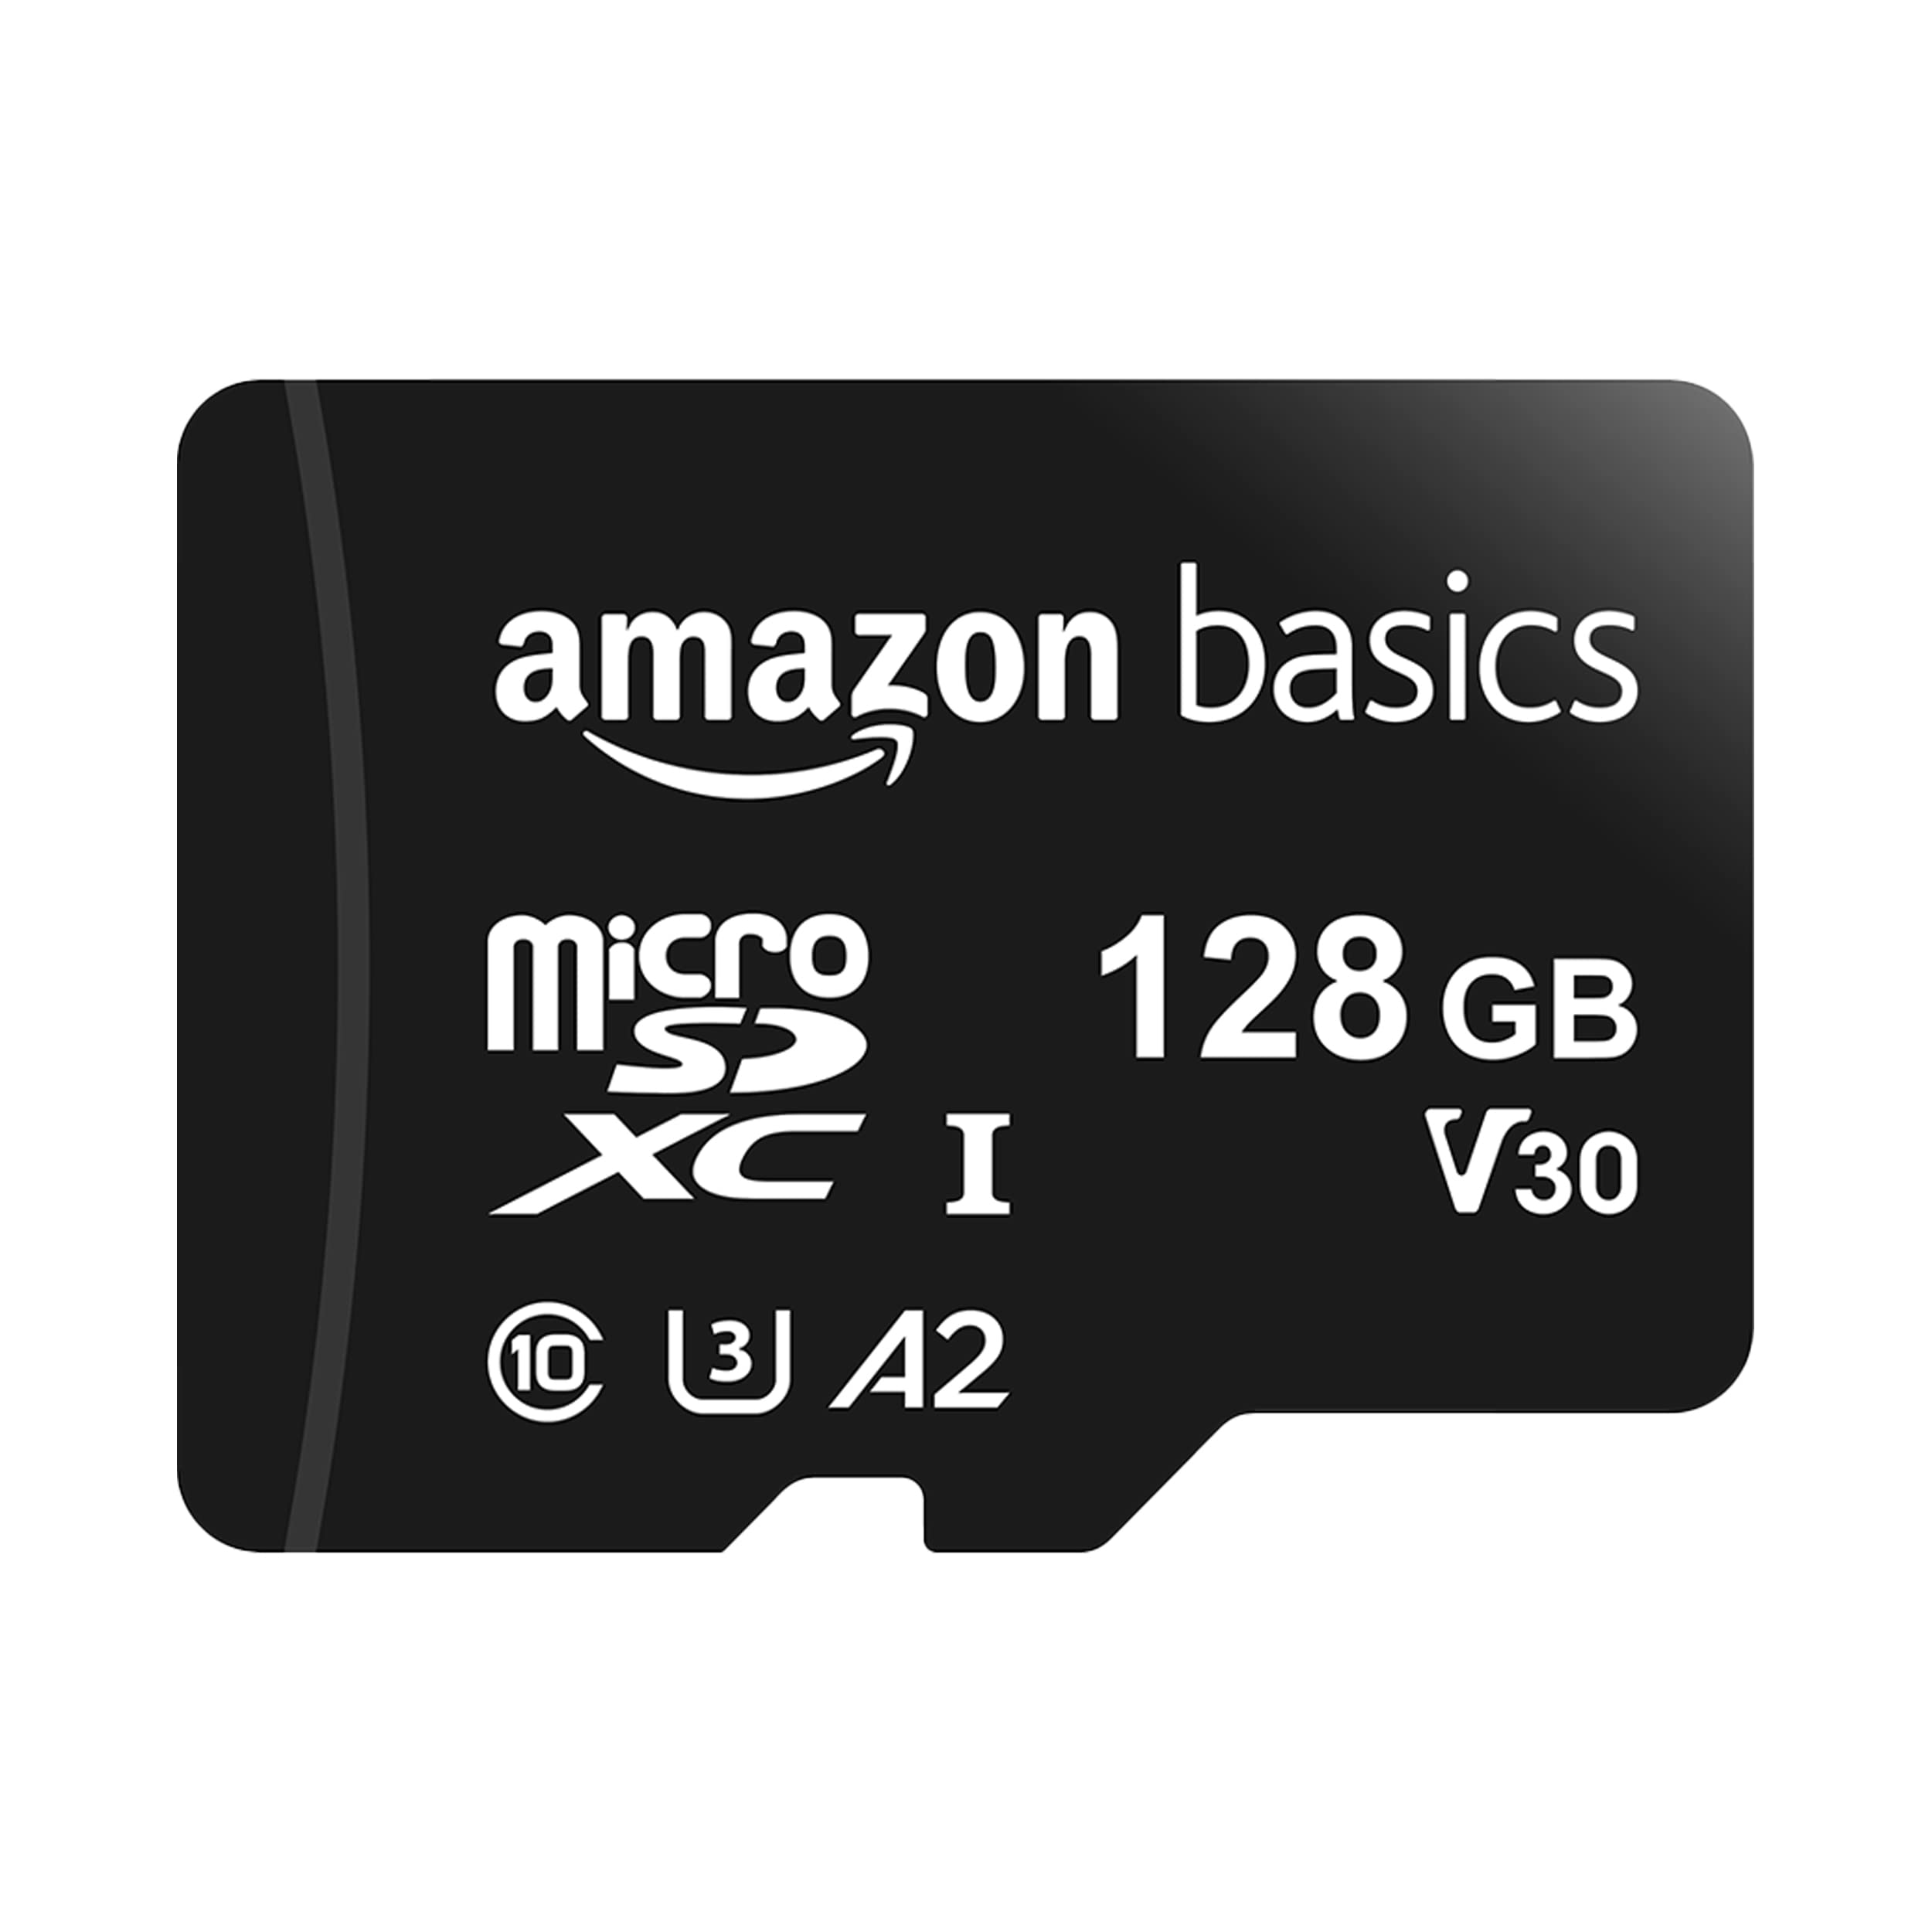 Amazon Basics microSDXC Memory Card with Full Size Adapter, A2, U3, Read Speed up to 100 MB/s, 128 GB, Black